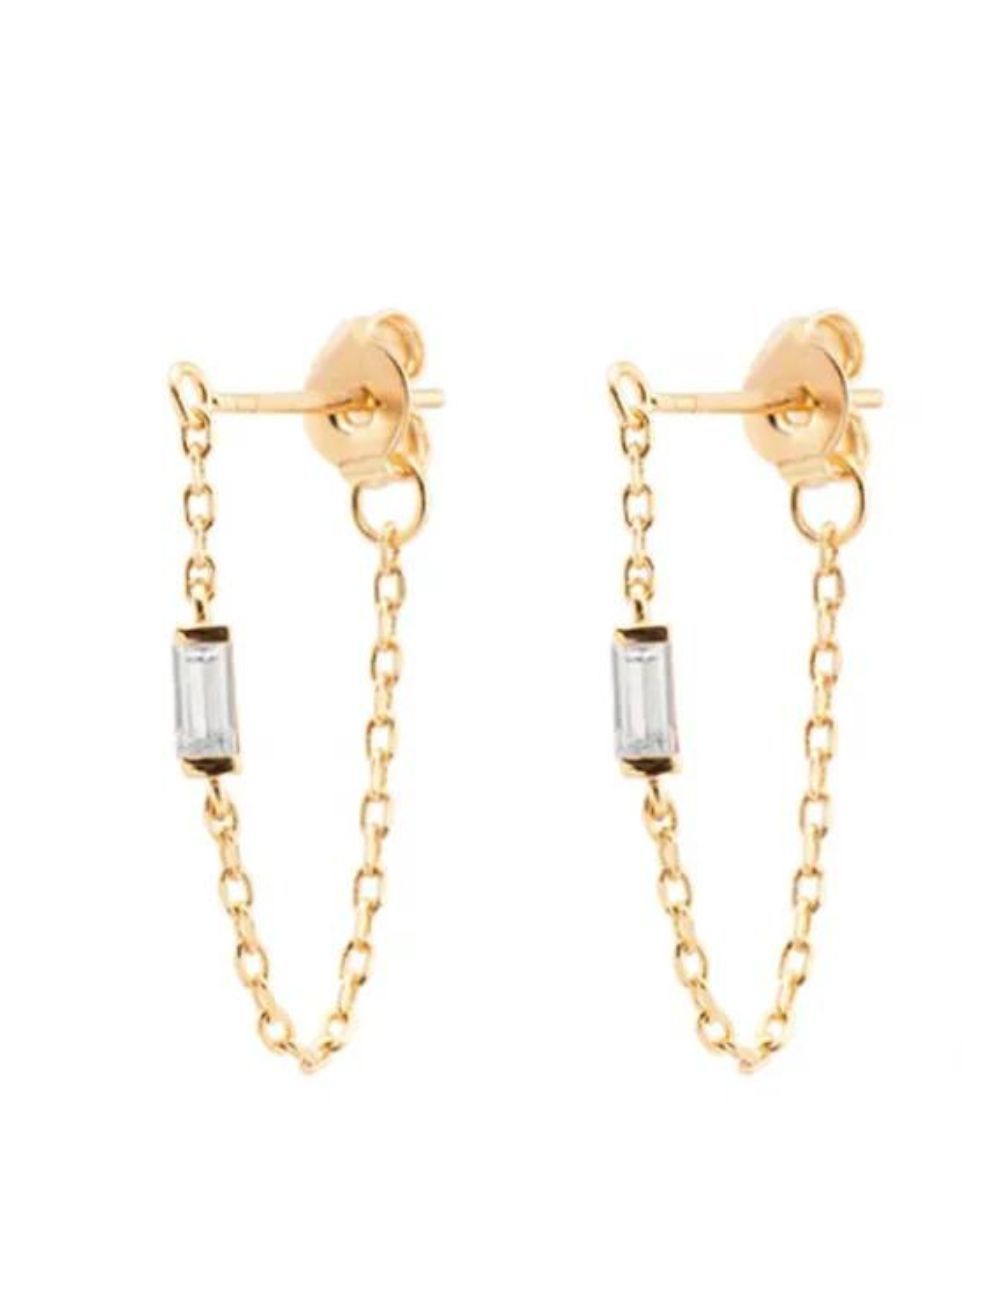 Nella earrings - Gold plated